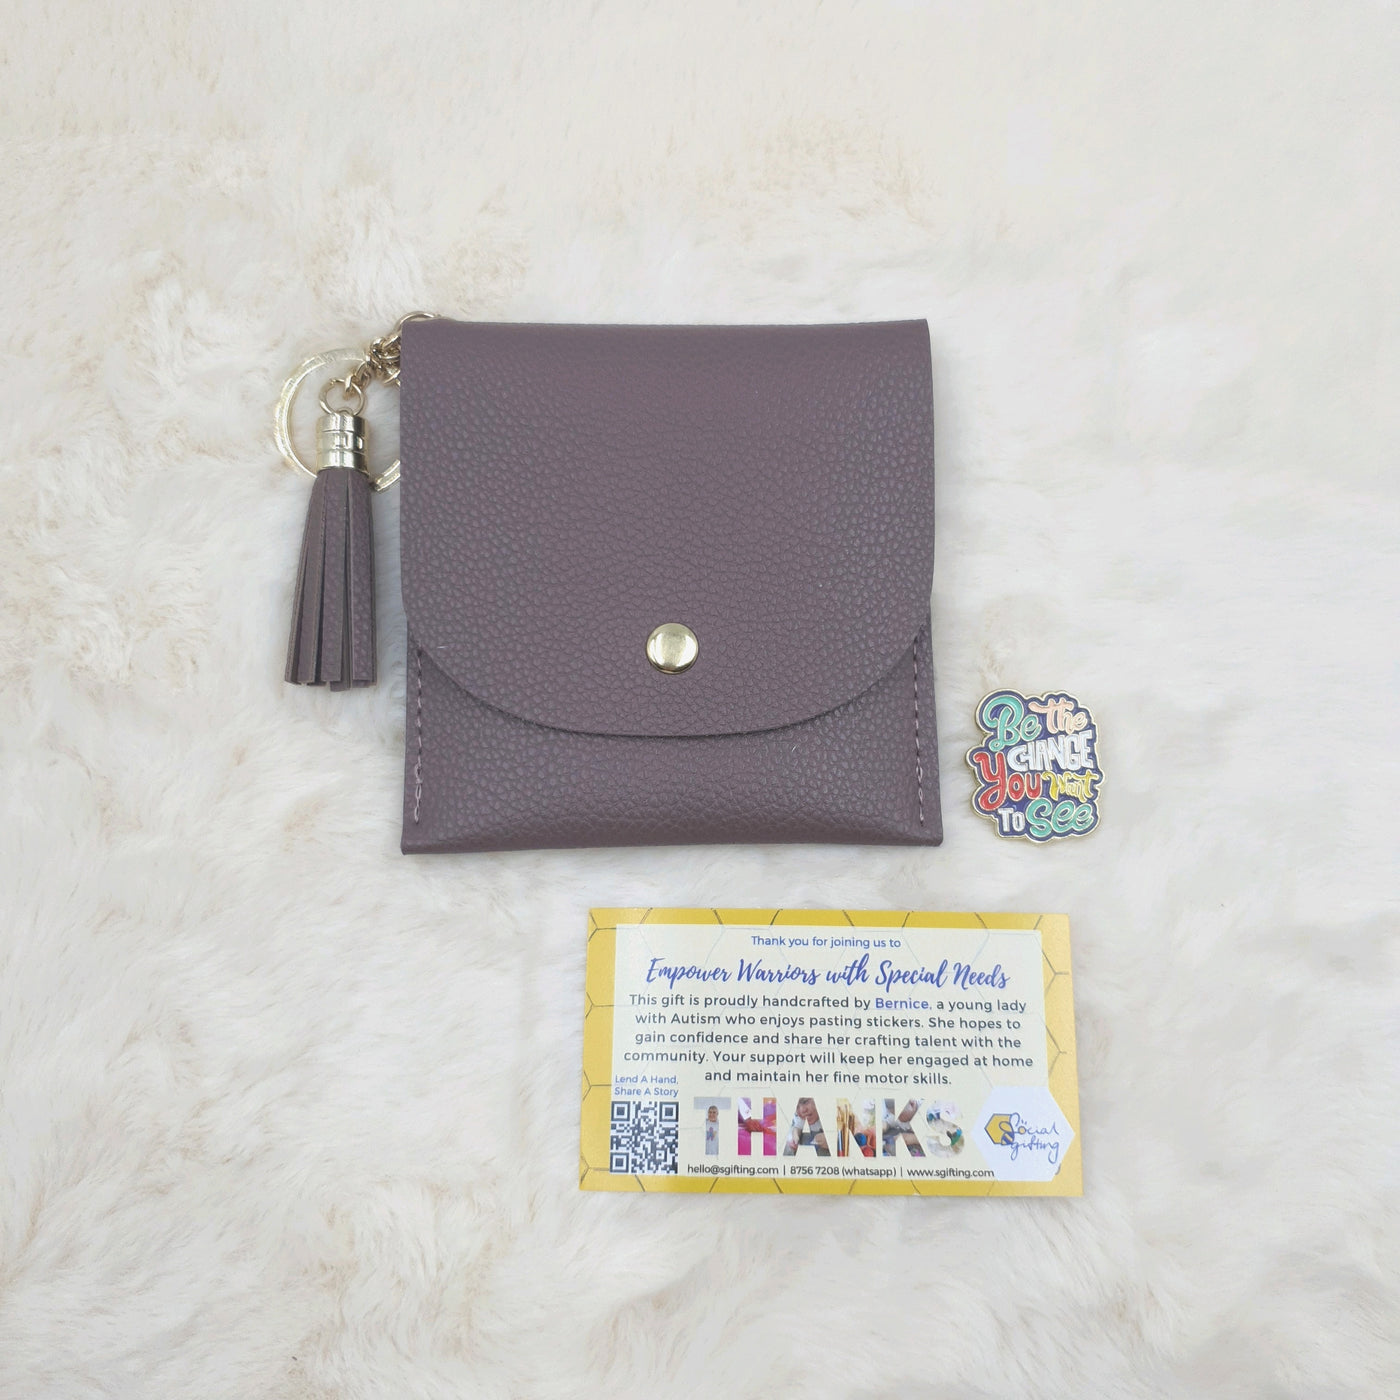 PU Leather Coin Purse with Motivational Pin